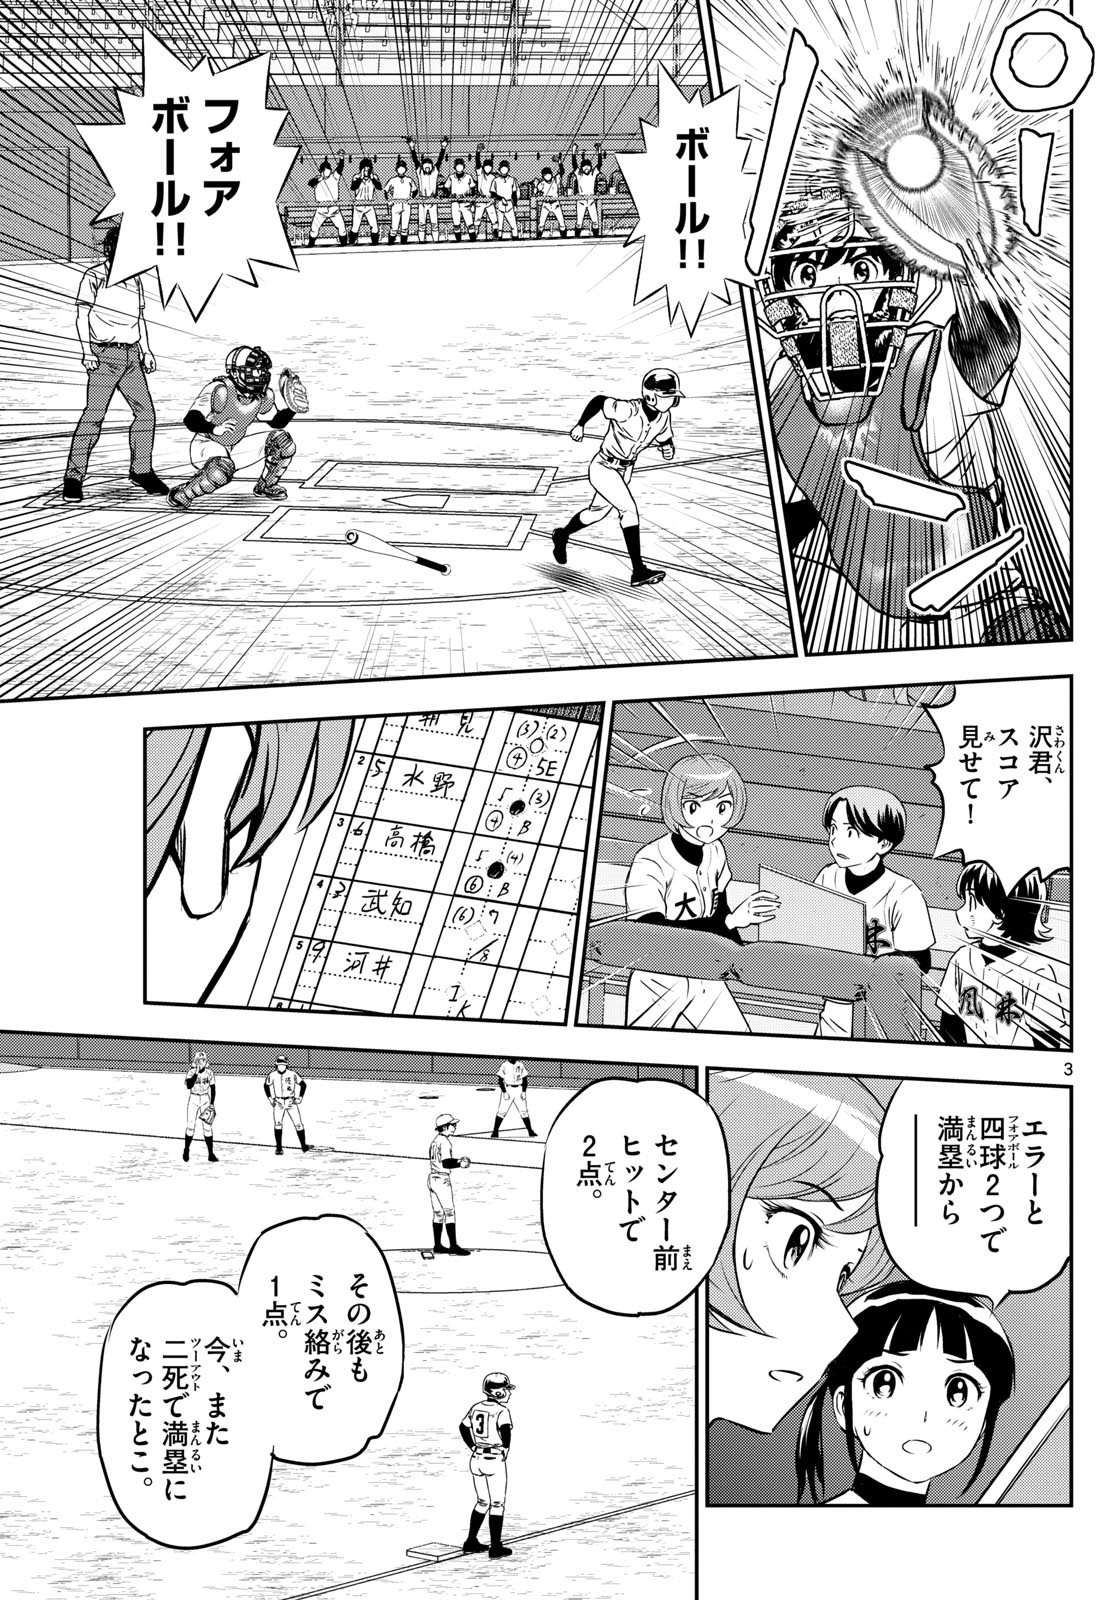 Major 2nd - メジャーセカンド - Chapter 284 - Page 3